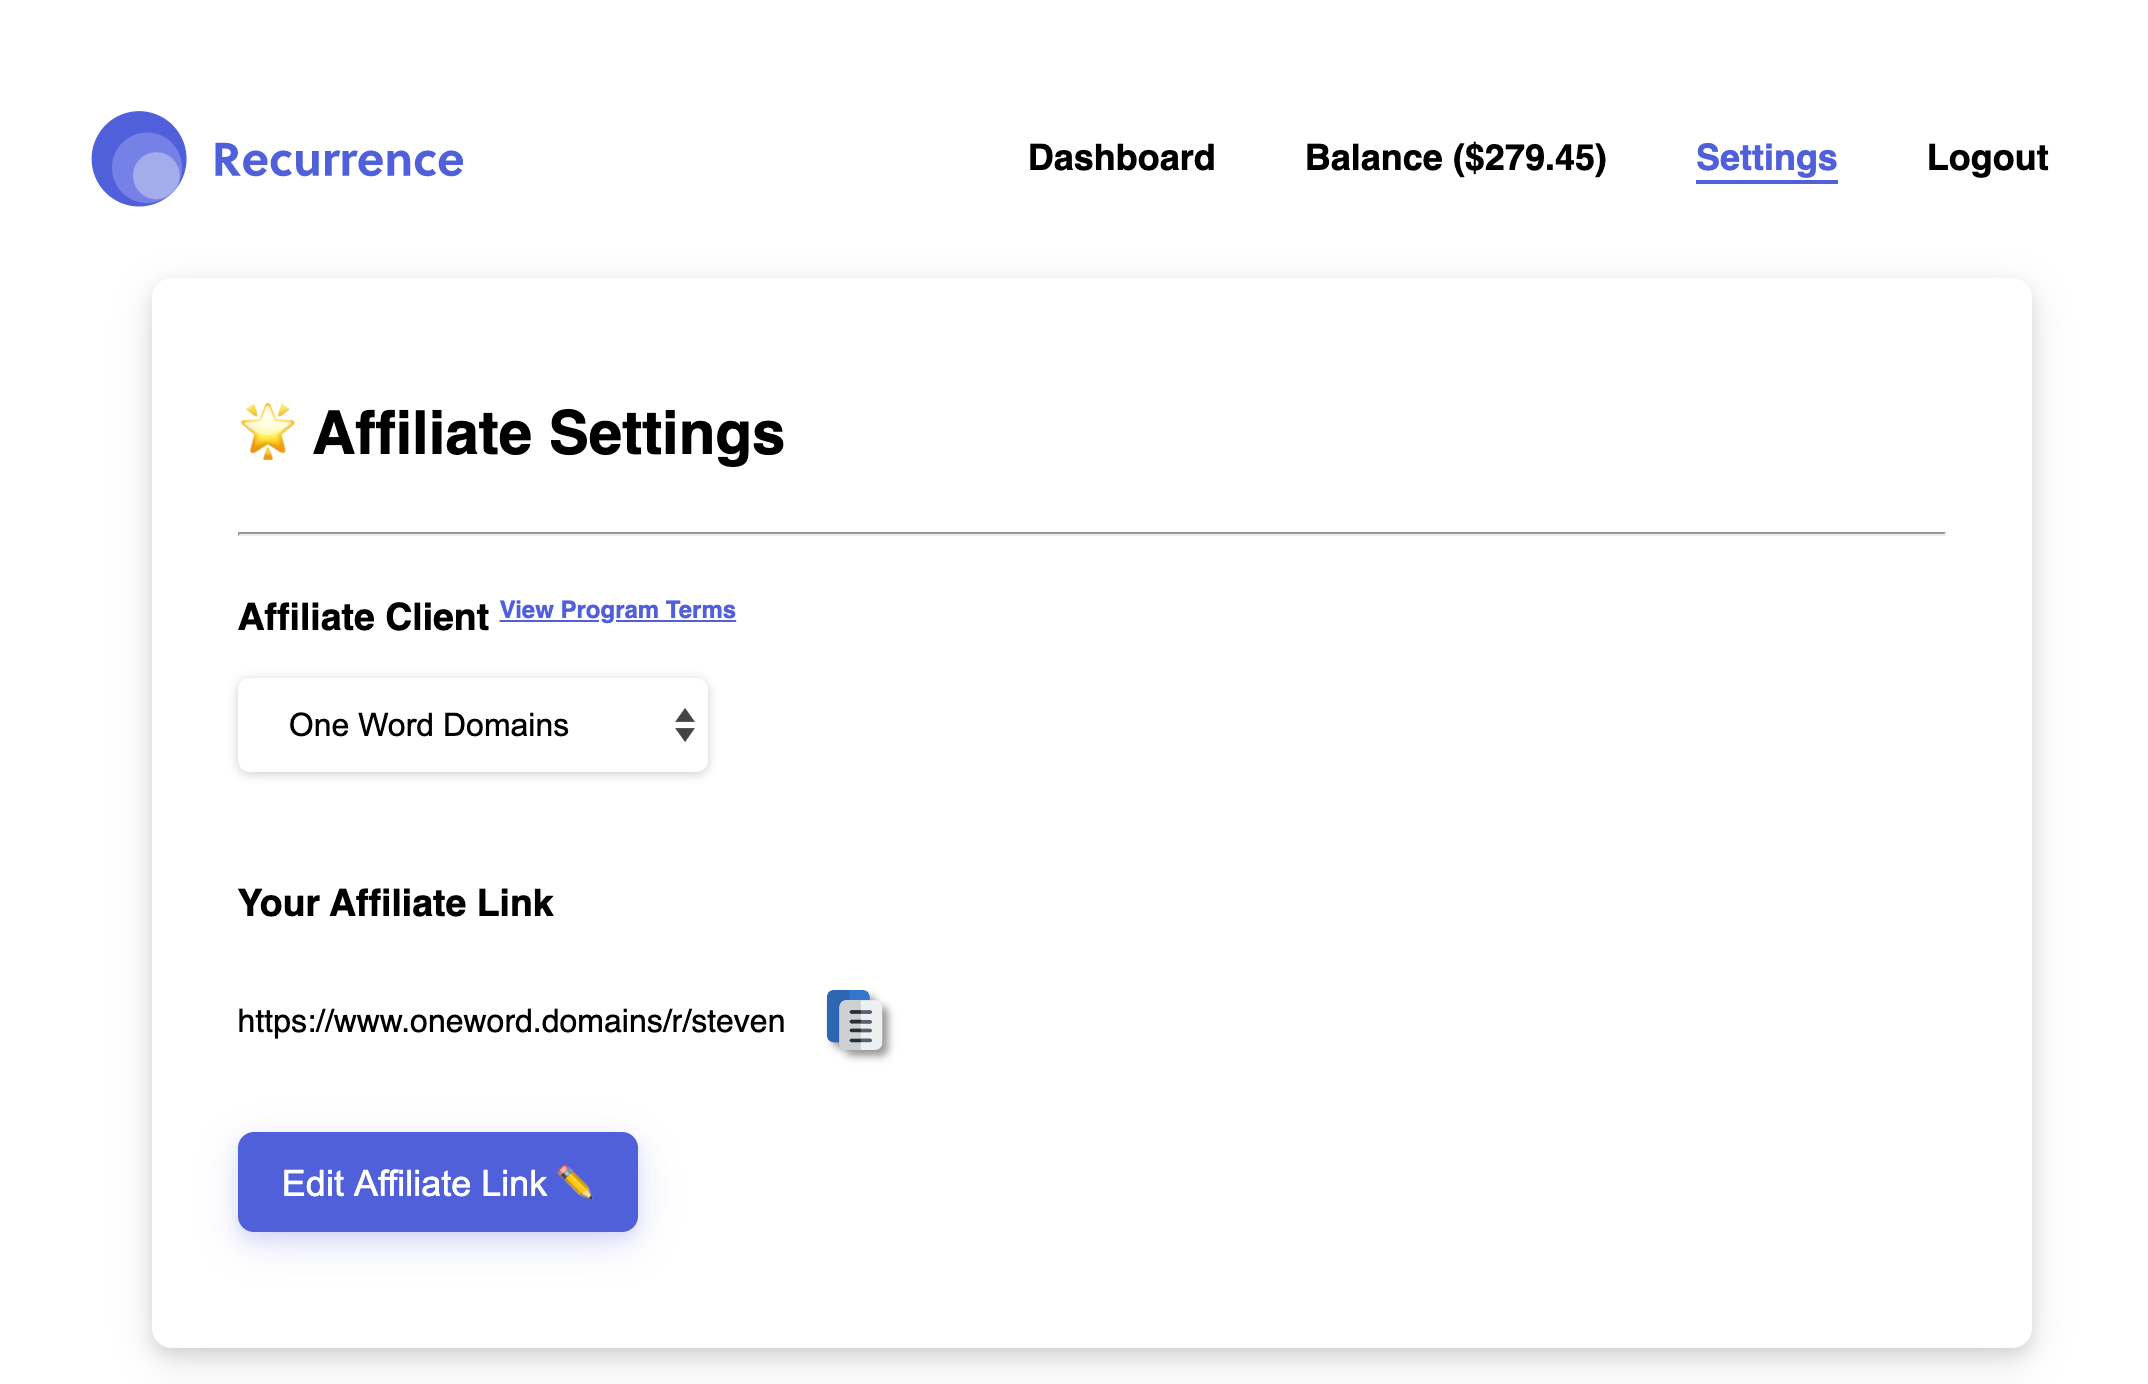 Customize your affiliate settings - Recurrence